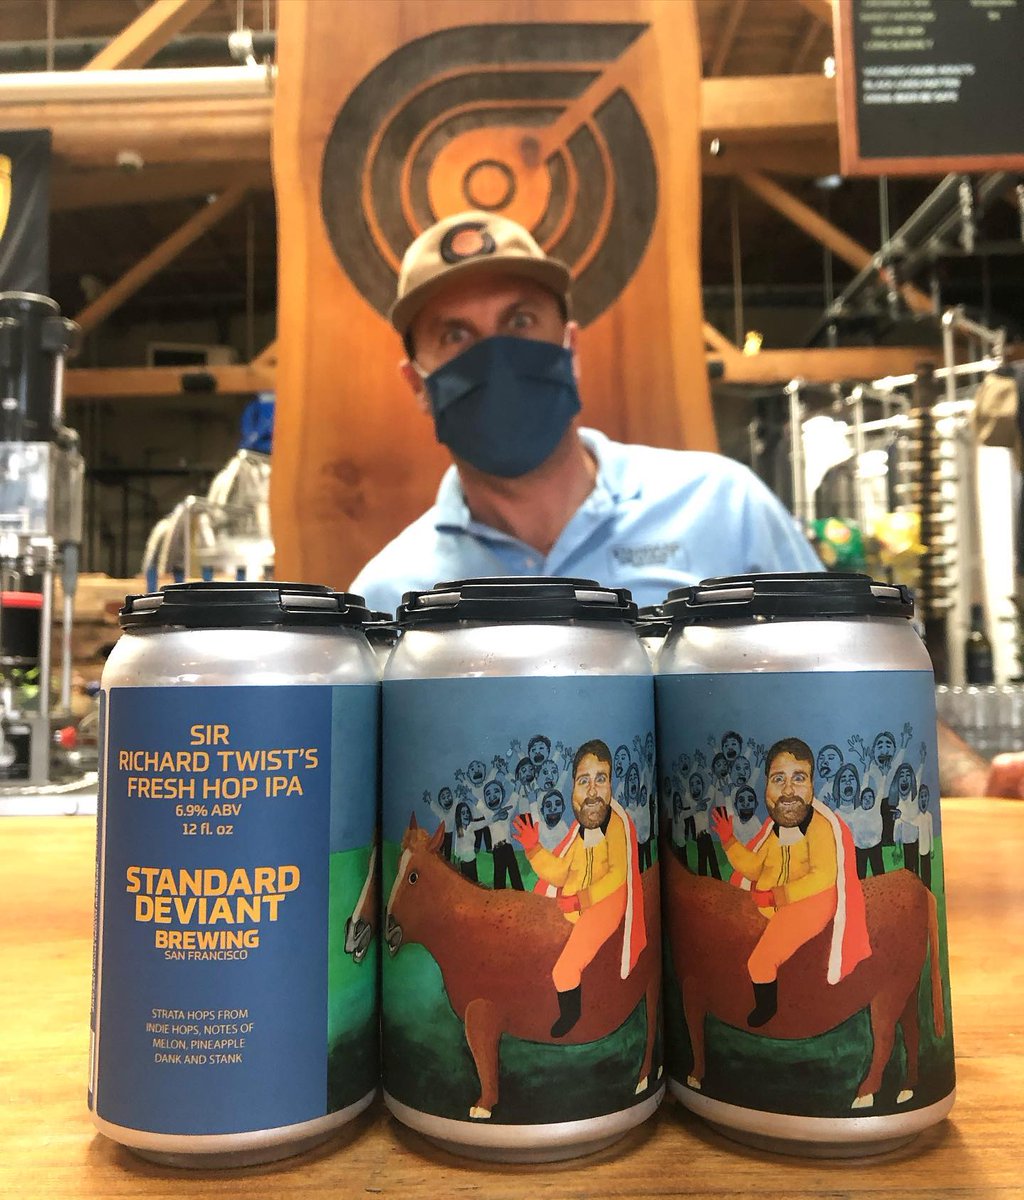 Standard Deviant's Sir Richard Twist West Coast Fresh Hop IPA (6.9% ABV) has us stoked. What's in the can? Strata hops, 100% Admiral malt, stank, dank, & notes of pineapple & melon. admiralmaltings.com #AdmiralMaltings #AskForAdmiral Image by @standarddeviantbrewing